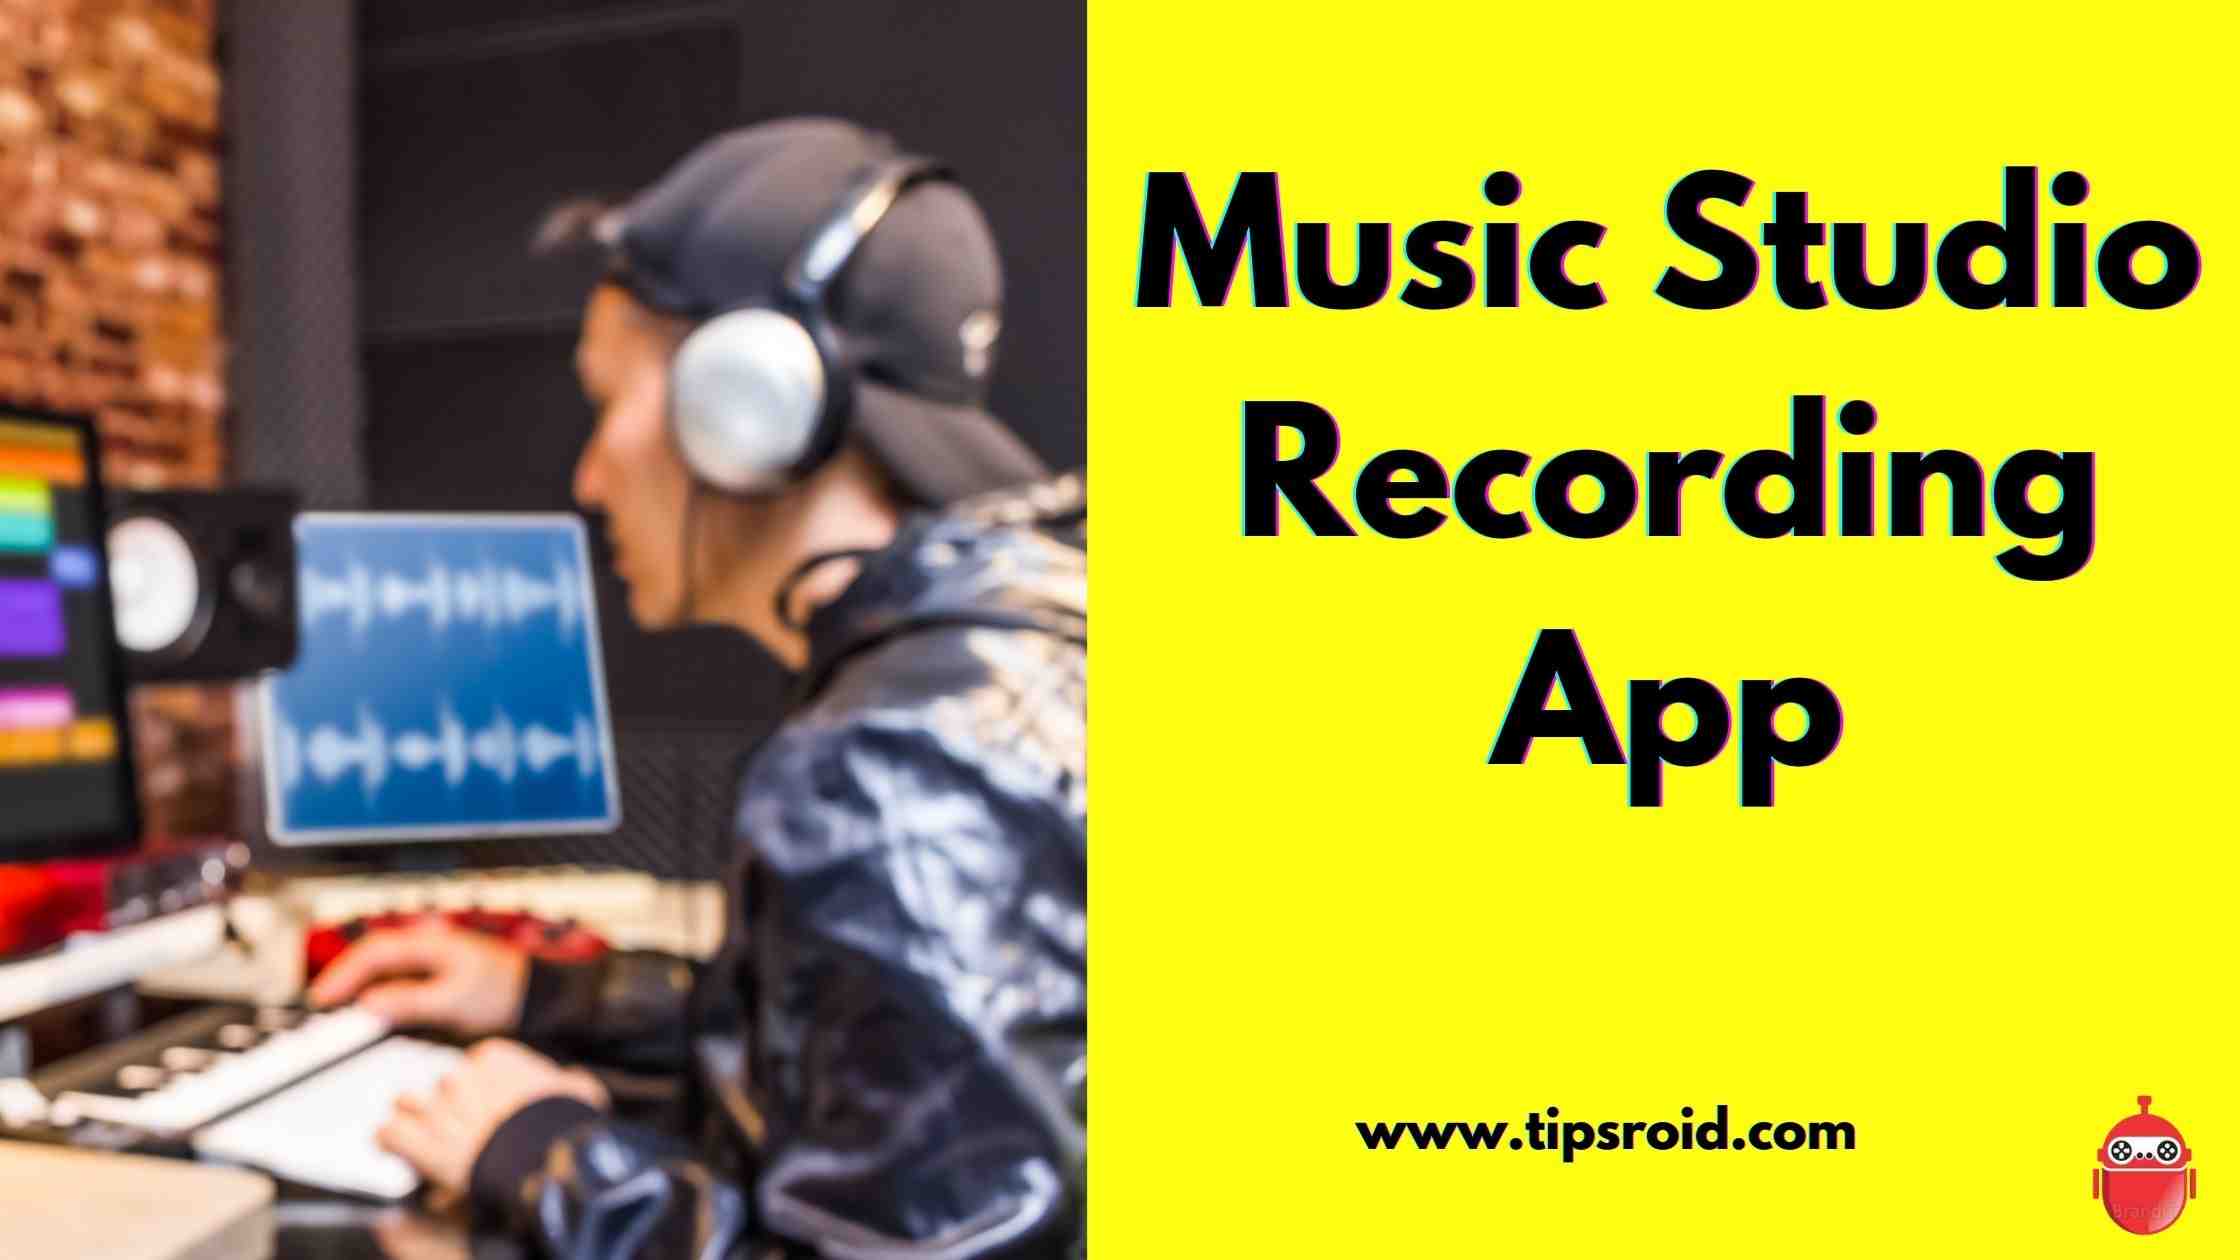 10 Best Music Studio Recording App For Android & iPhone